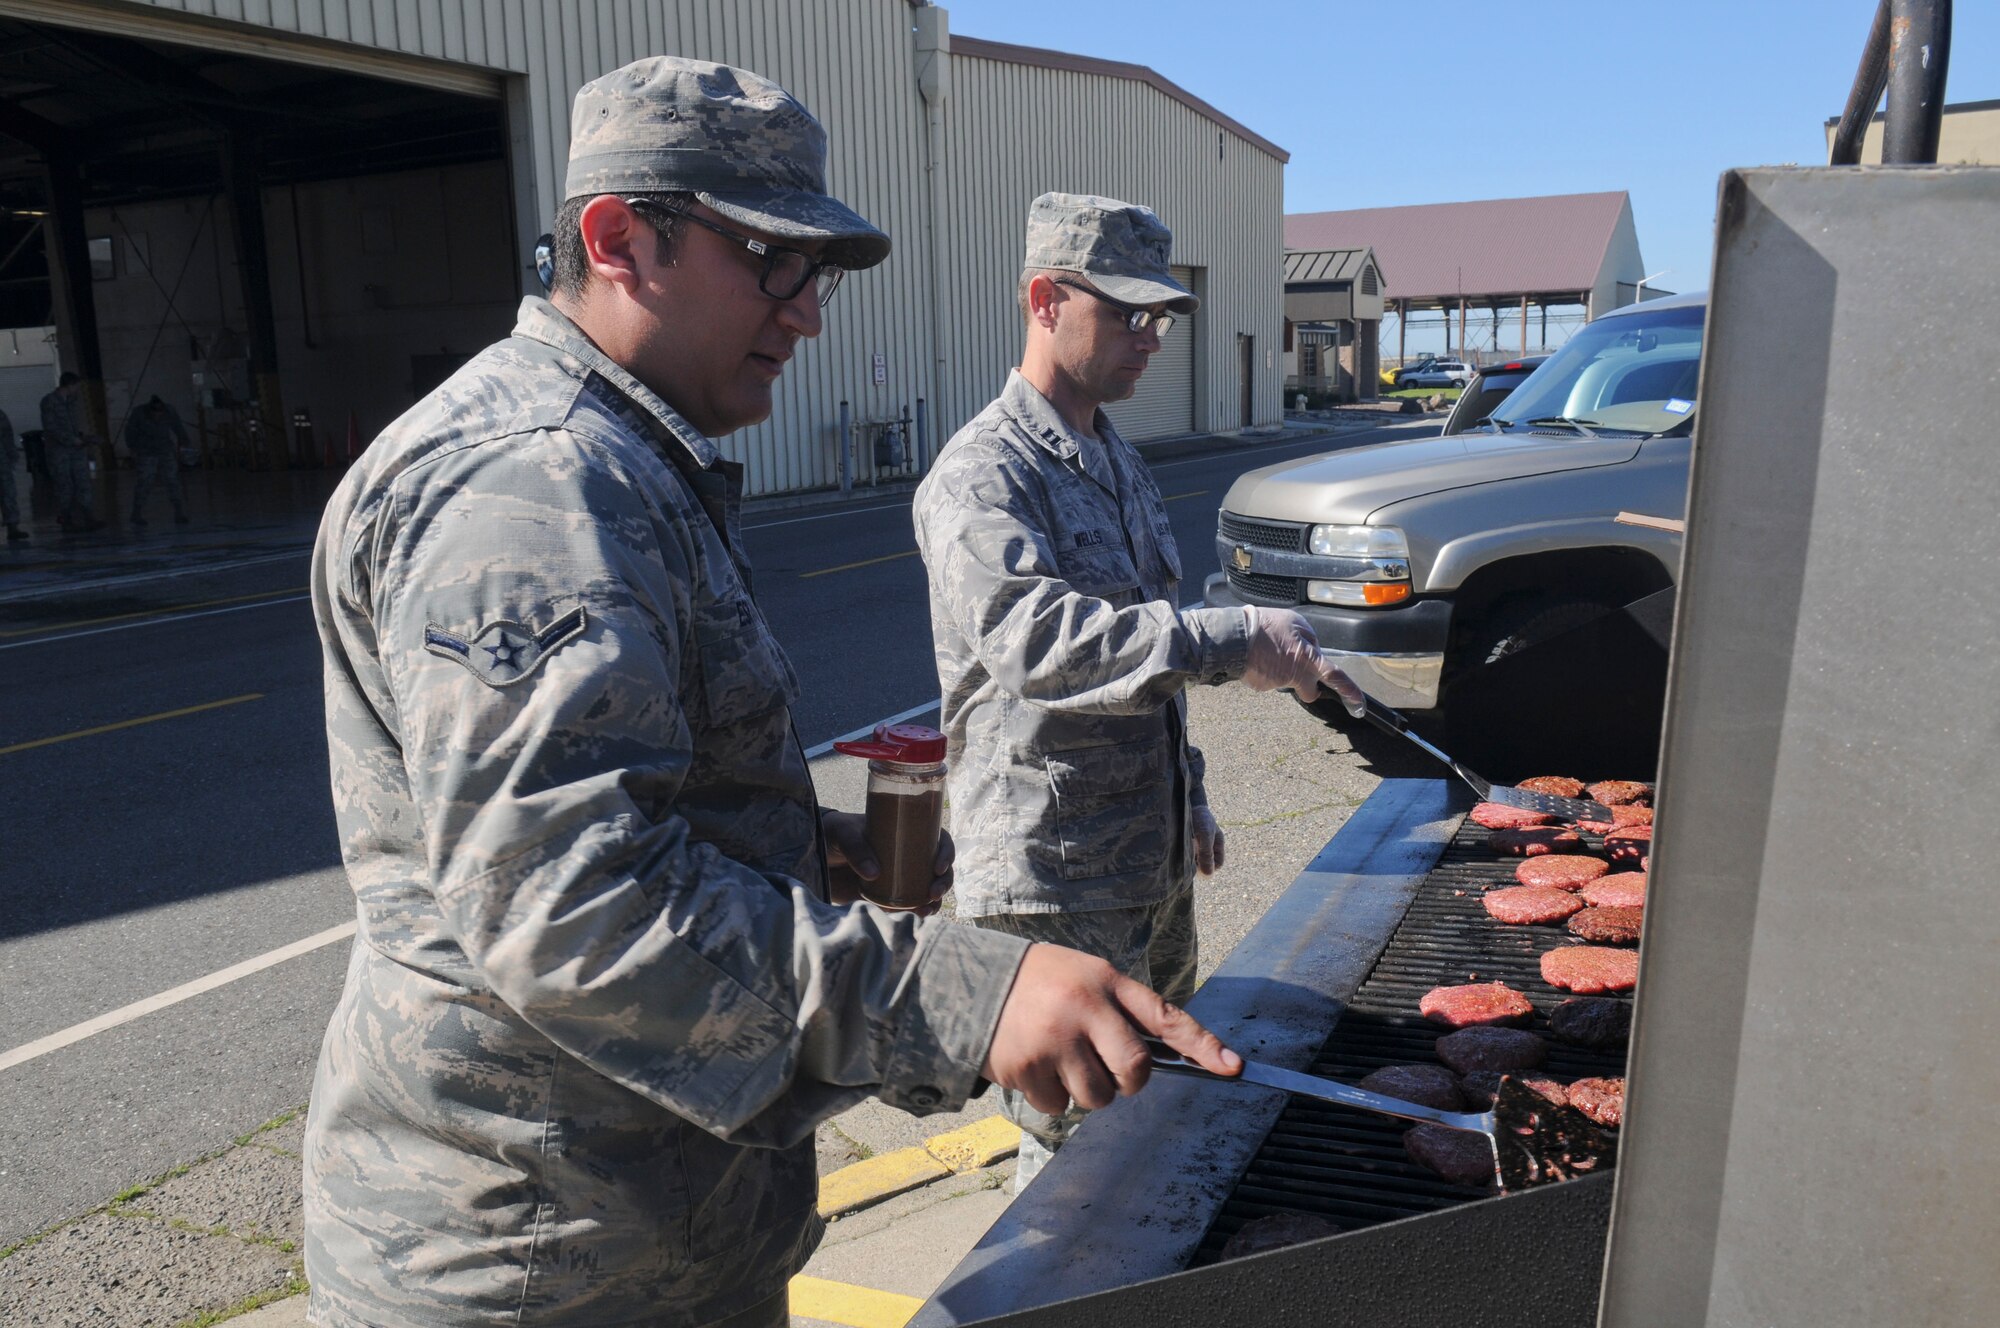 Airman Armado Esparza, and Chaplain (Capt.) Jeromy Wells, barbeque at Beale Air Force Base, California, Mar. 17, 2016. The Beale Chaplain Corps Team held the inaugural “Airman 2 Airman” Prayer Lunch. The grill team cooked more than 300 burgers for the event. (U.S. Air Force photo by Senior Airman Michael Hunsaker)